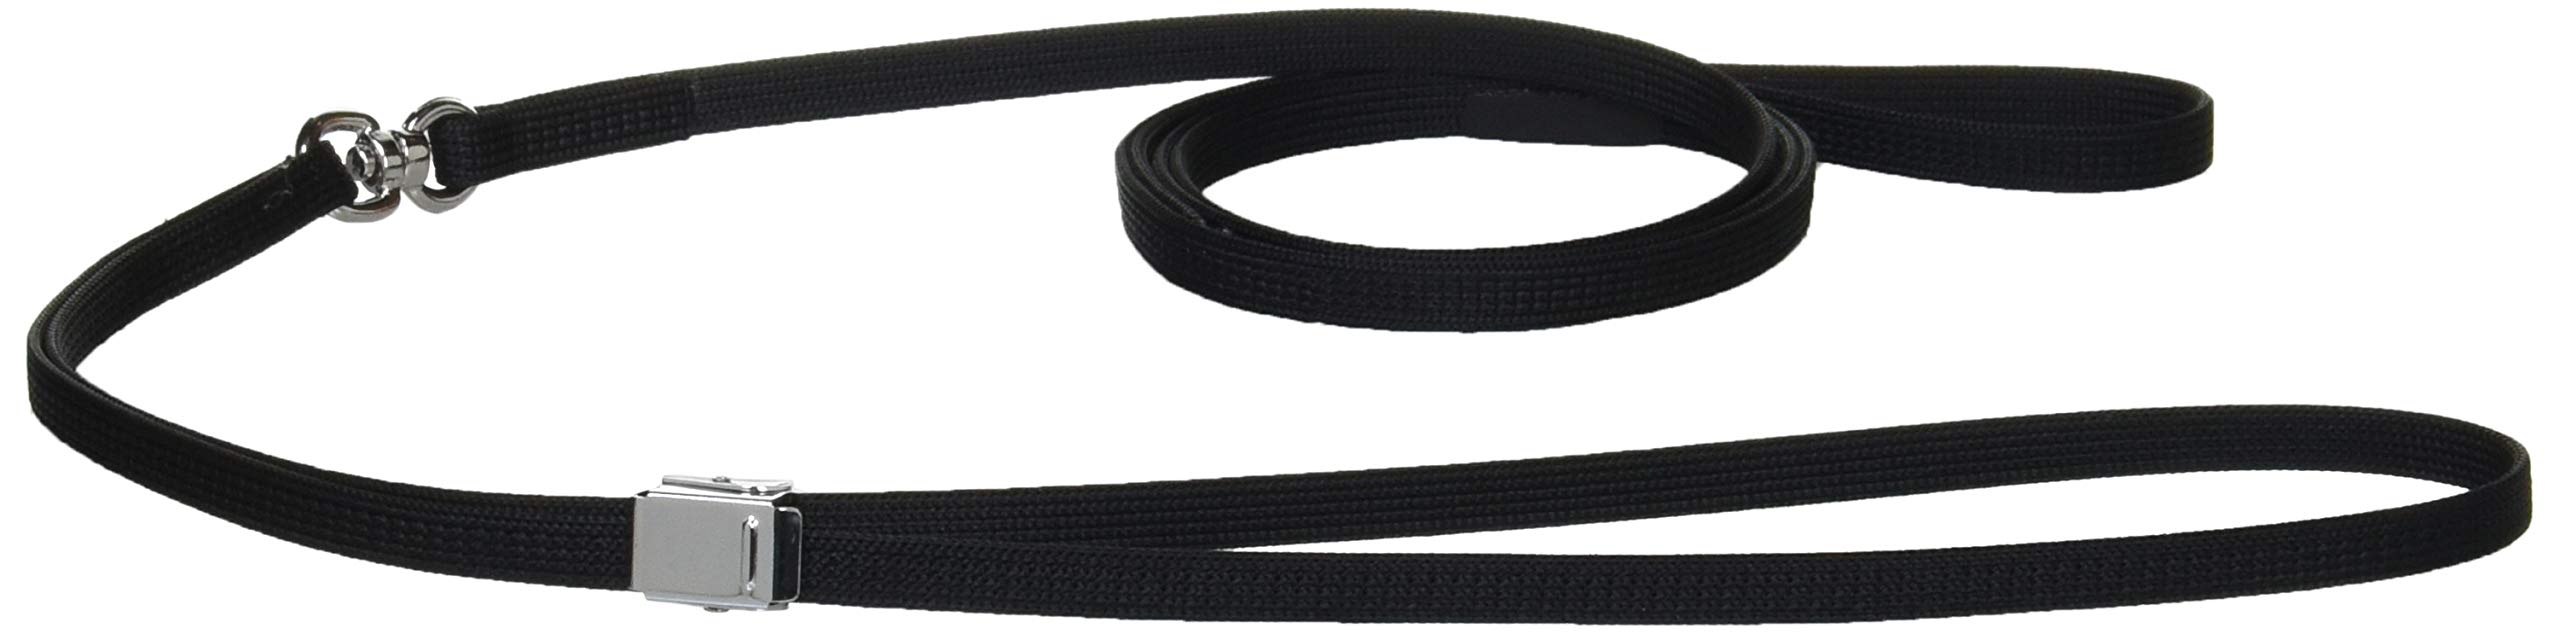  gold peks dog for training Lead for small dog soft show Lead black S size 